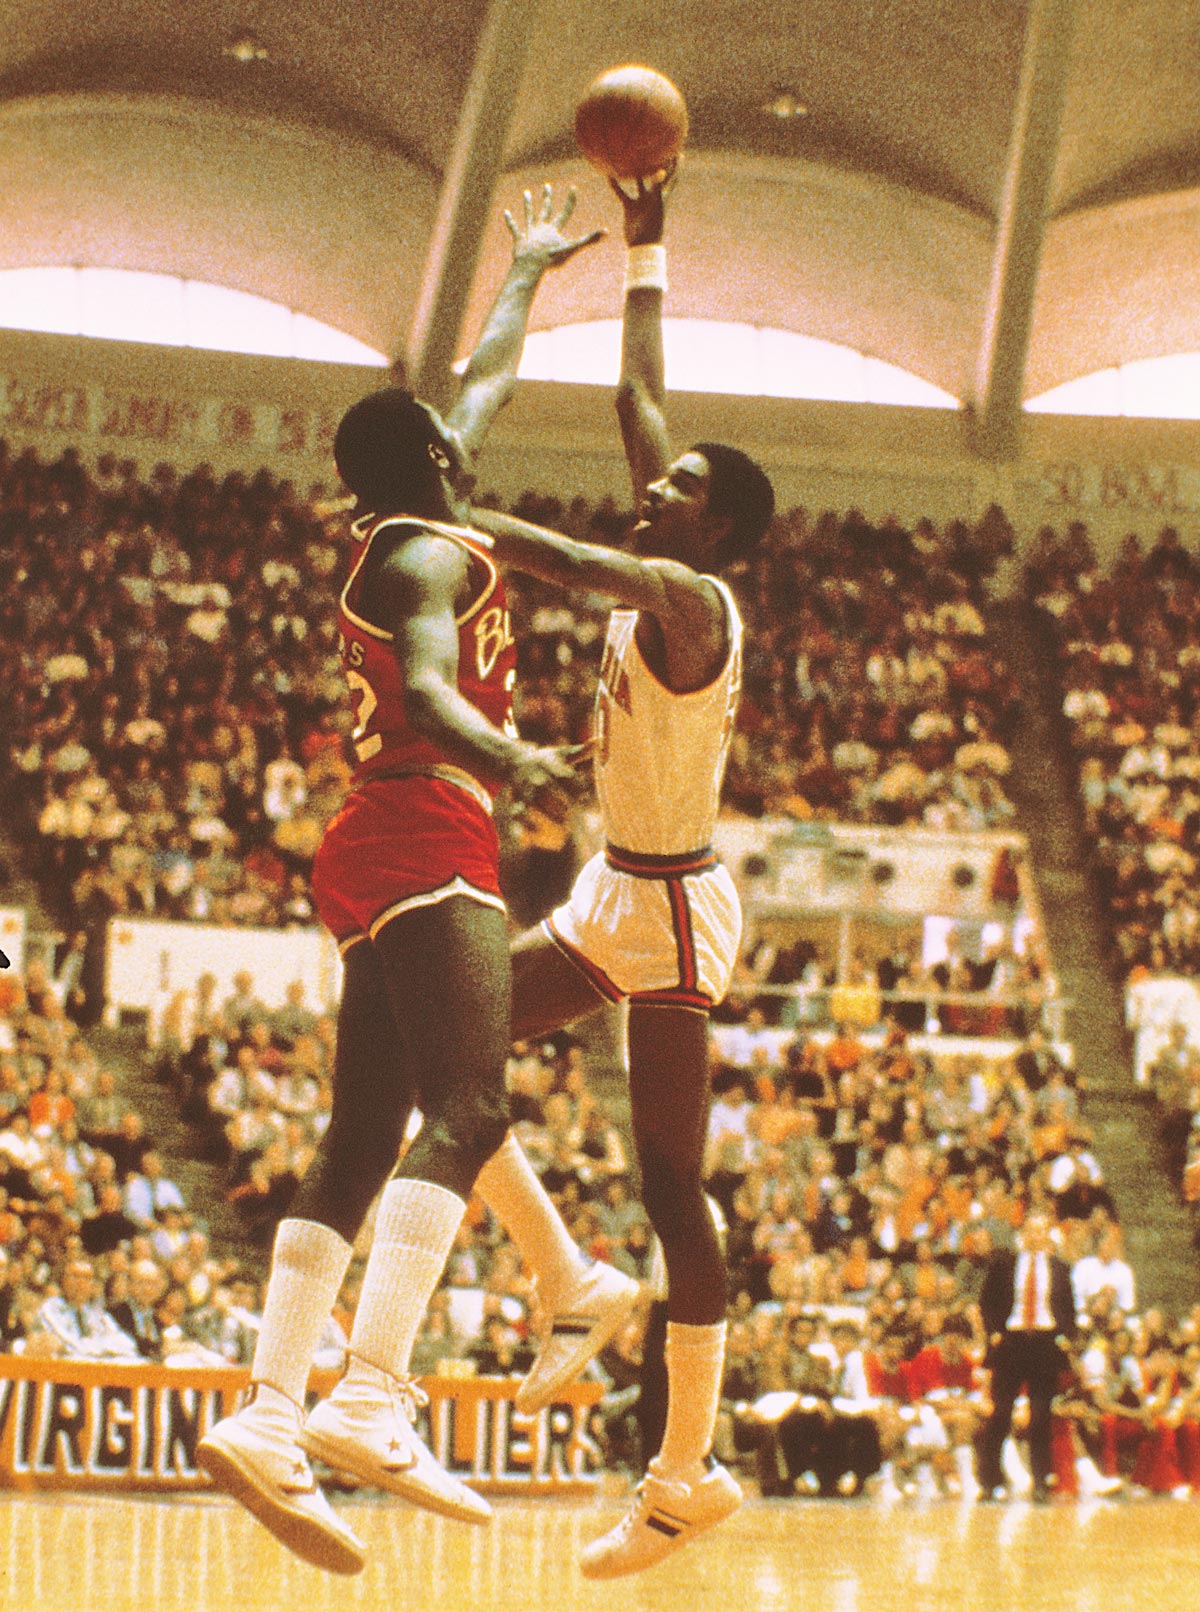 Sampson, right, protecting the basketball from an opponent